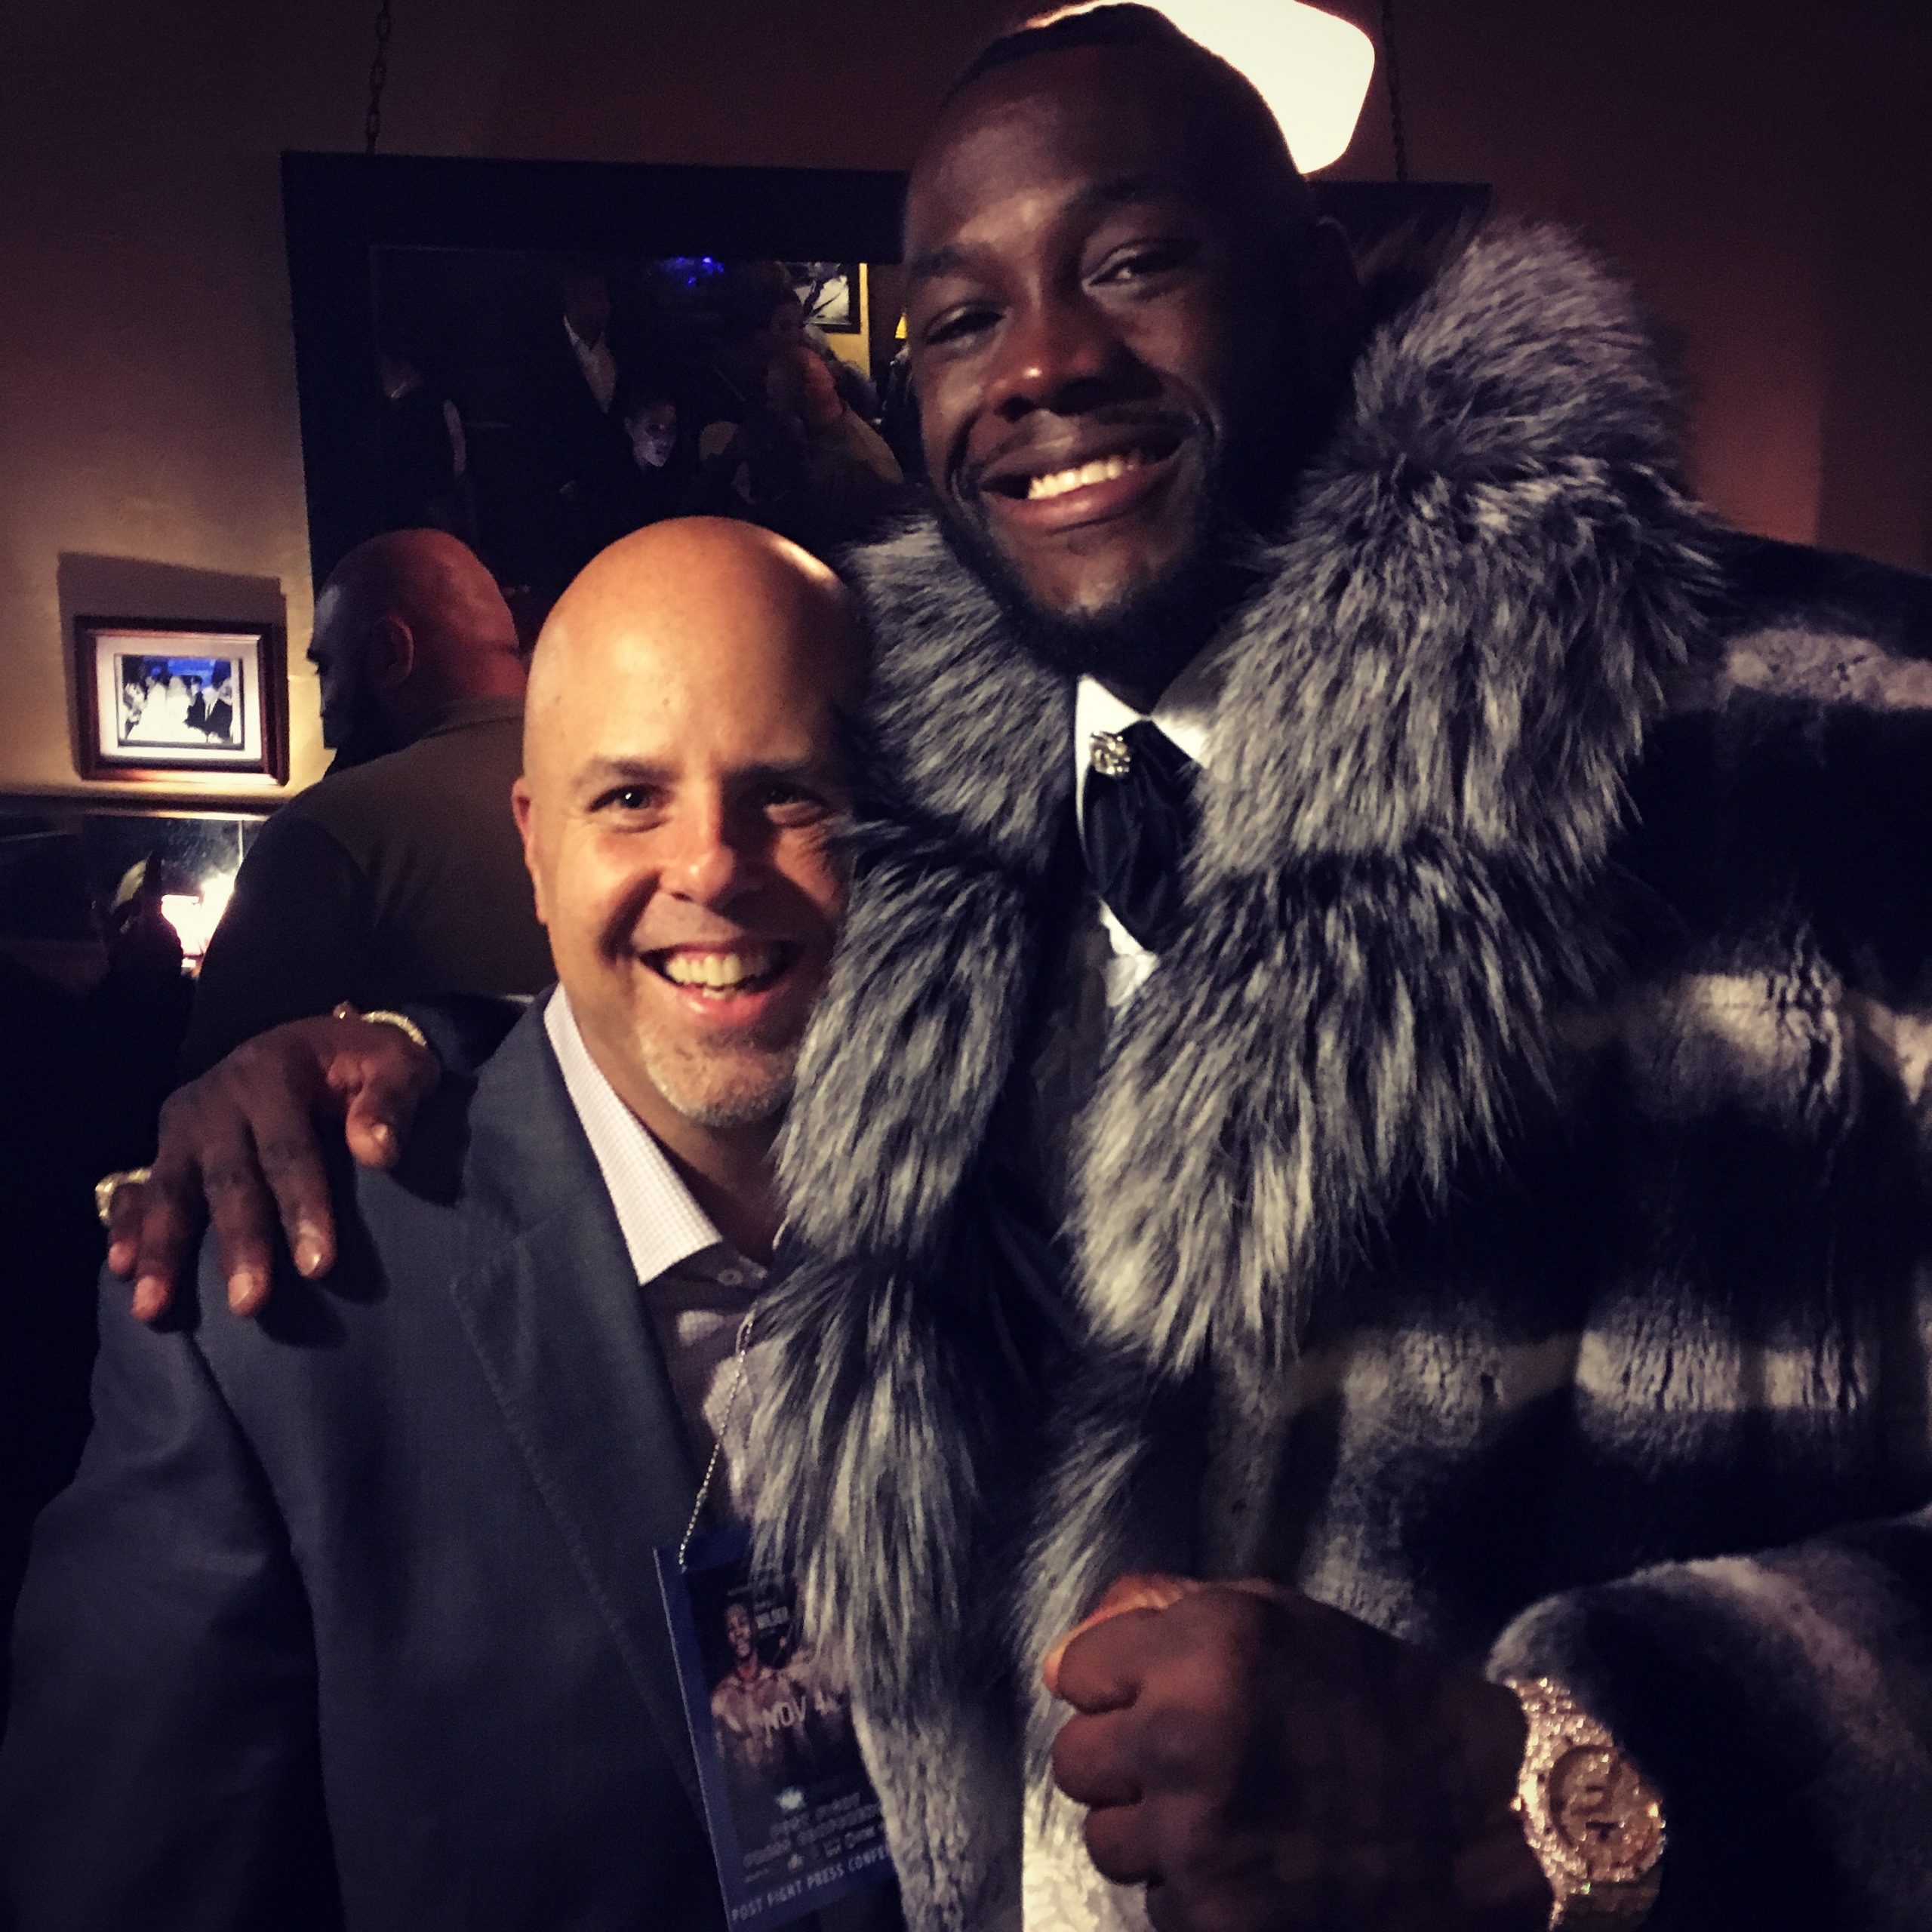 Harry and Deontay Wilder